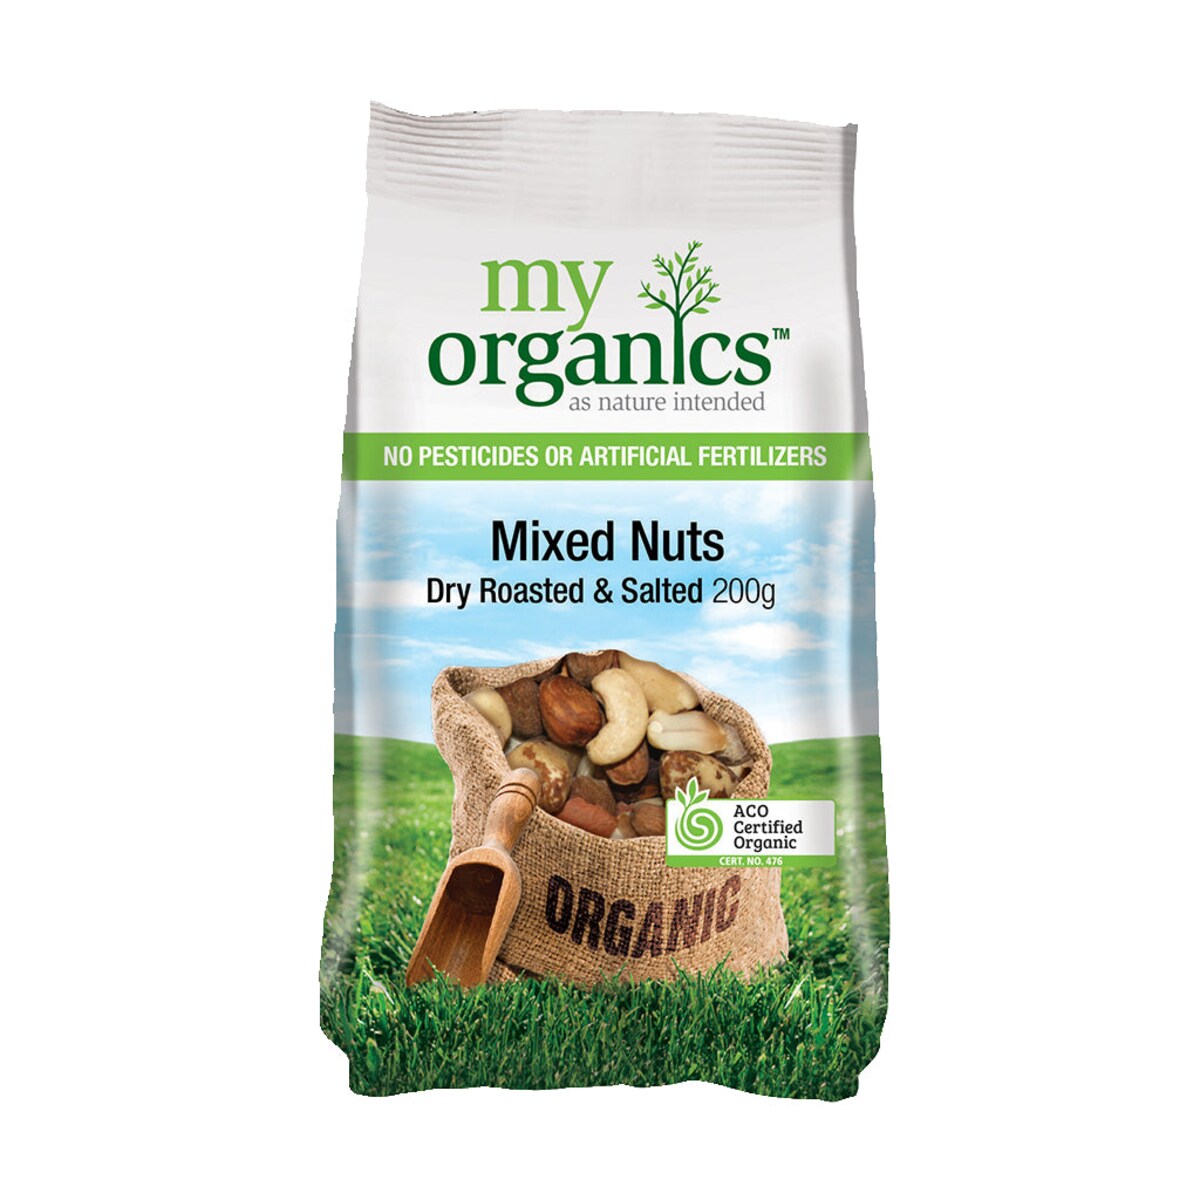 My Organics Mix Nuts Dry Roasted & Salted 200g